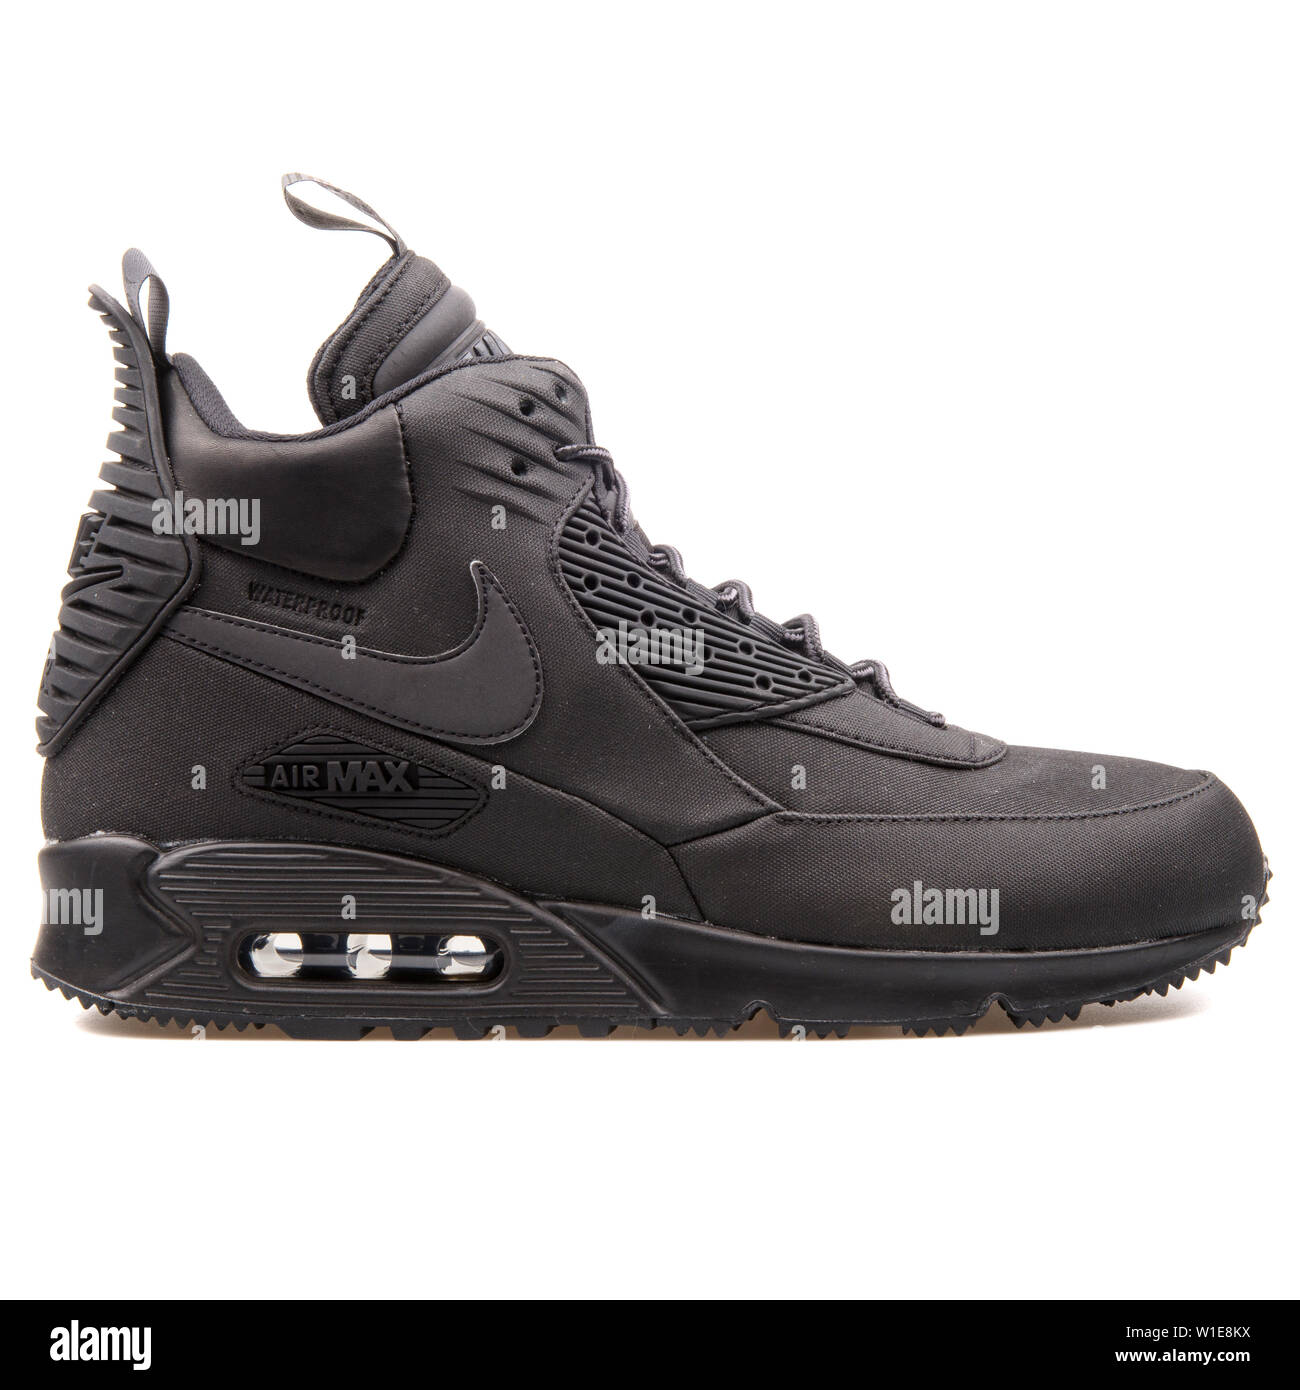 Assault Outlook hop VIENNA, AUSTRIA - AUGUST 25, 2017: Nike Air Max 90 Sneakerboot Winter black  sneaker on white background Stock Photo - Alamy